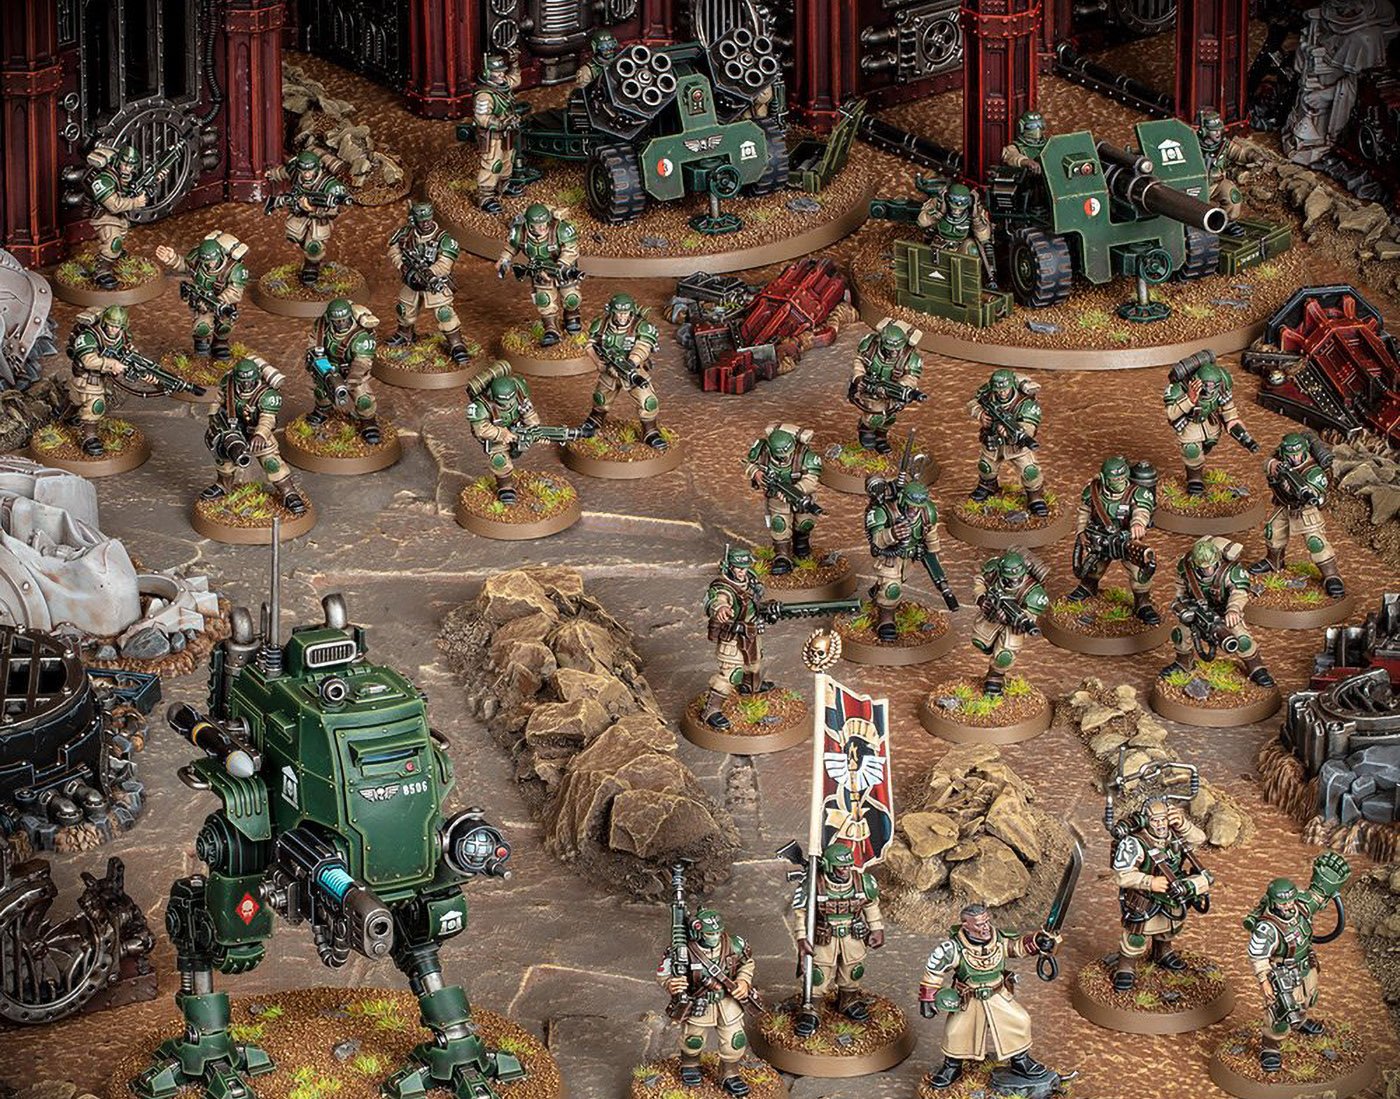 How To Play Astra Militarum In Warhammer 40K - Bell of Lost Souls